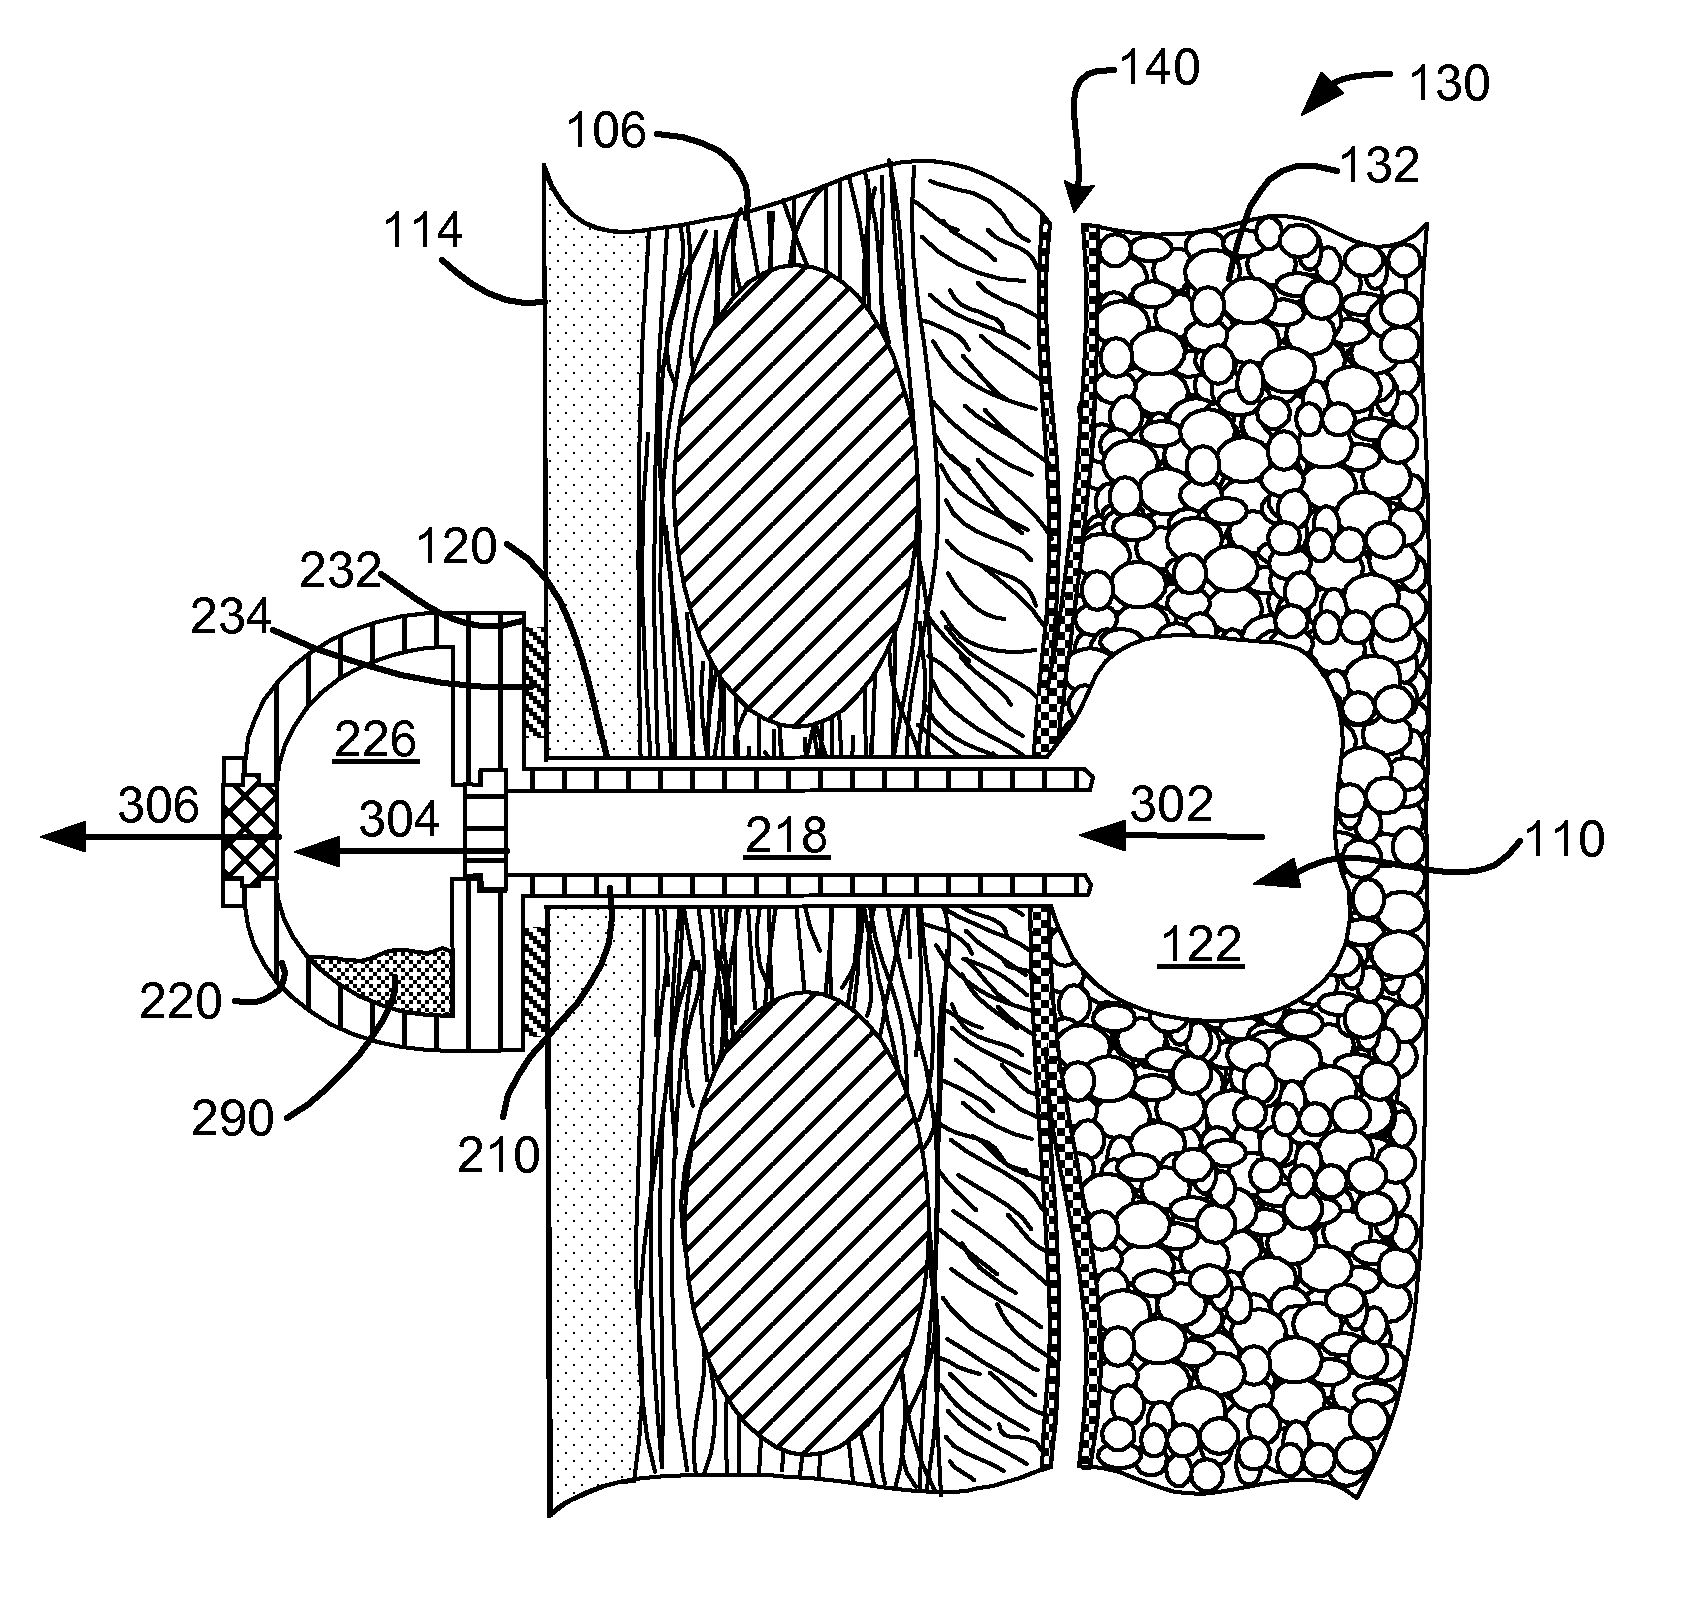 Pneumostoma management device and method for treatment of chronic obstructive pulmonary disease